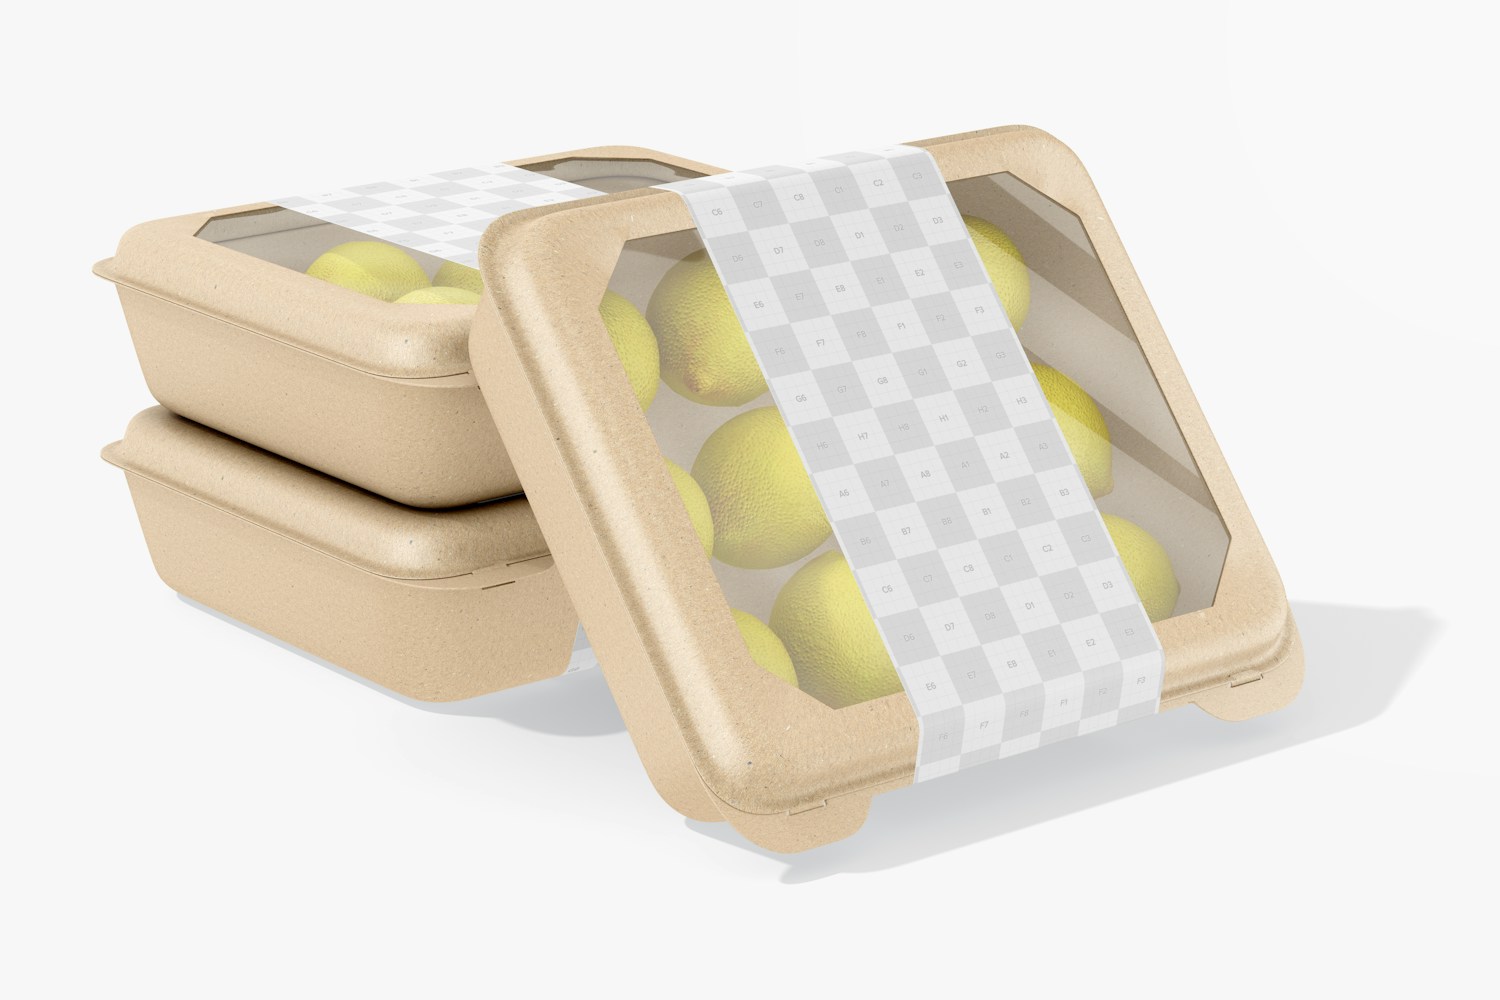 Square Fruit Containers Mockup